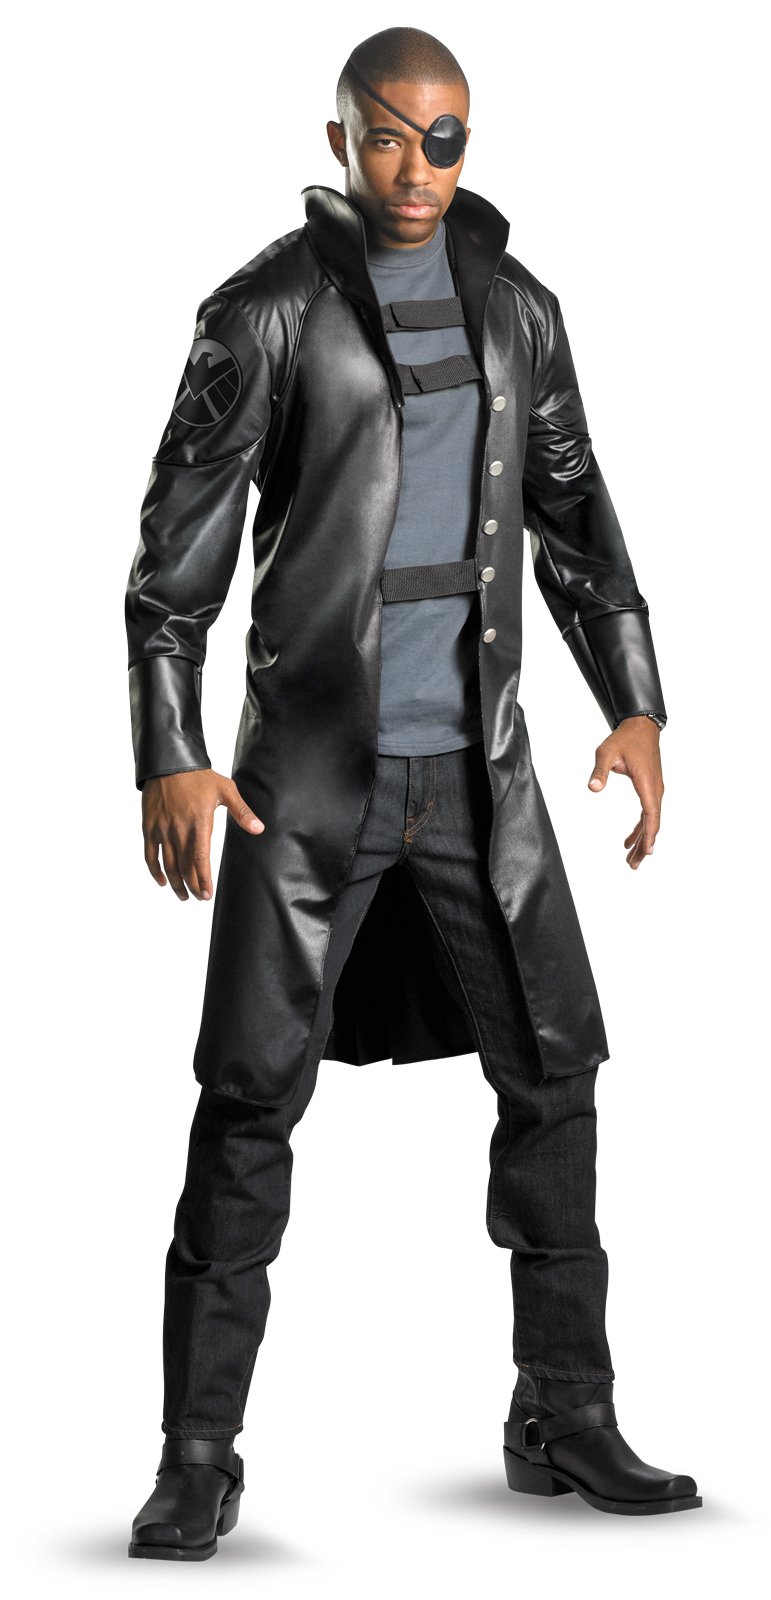 The Avengers Nick Fury Deluxe Adult Costume